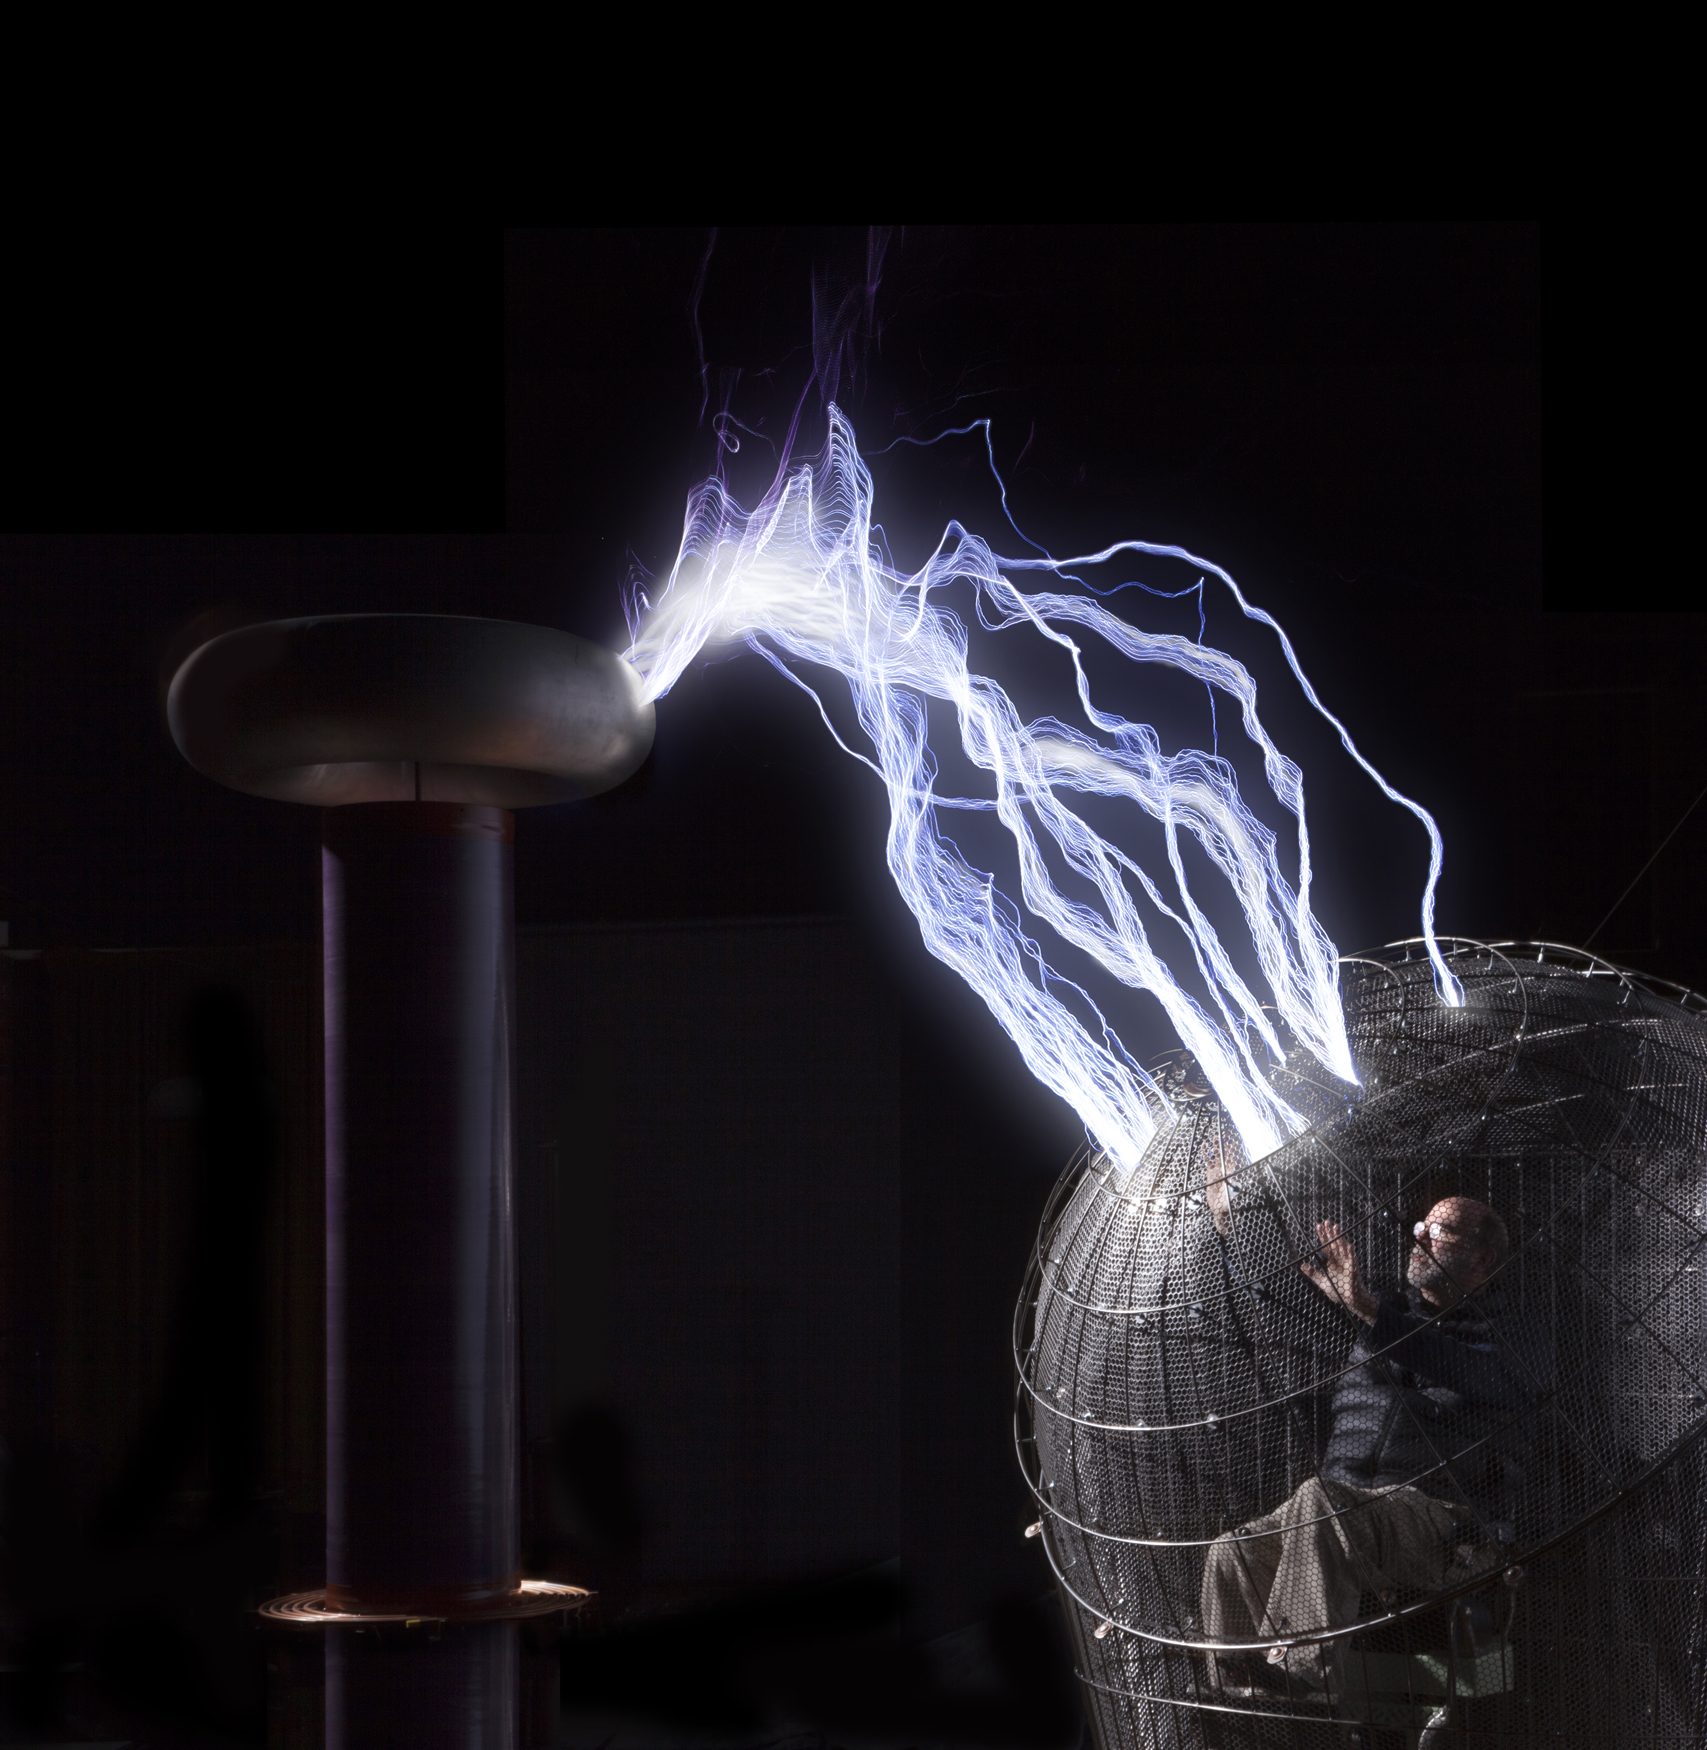 man crouched in a metal cage shaped like a ball with lightning bolts shooting at from a tall metal rod.